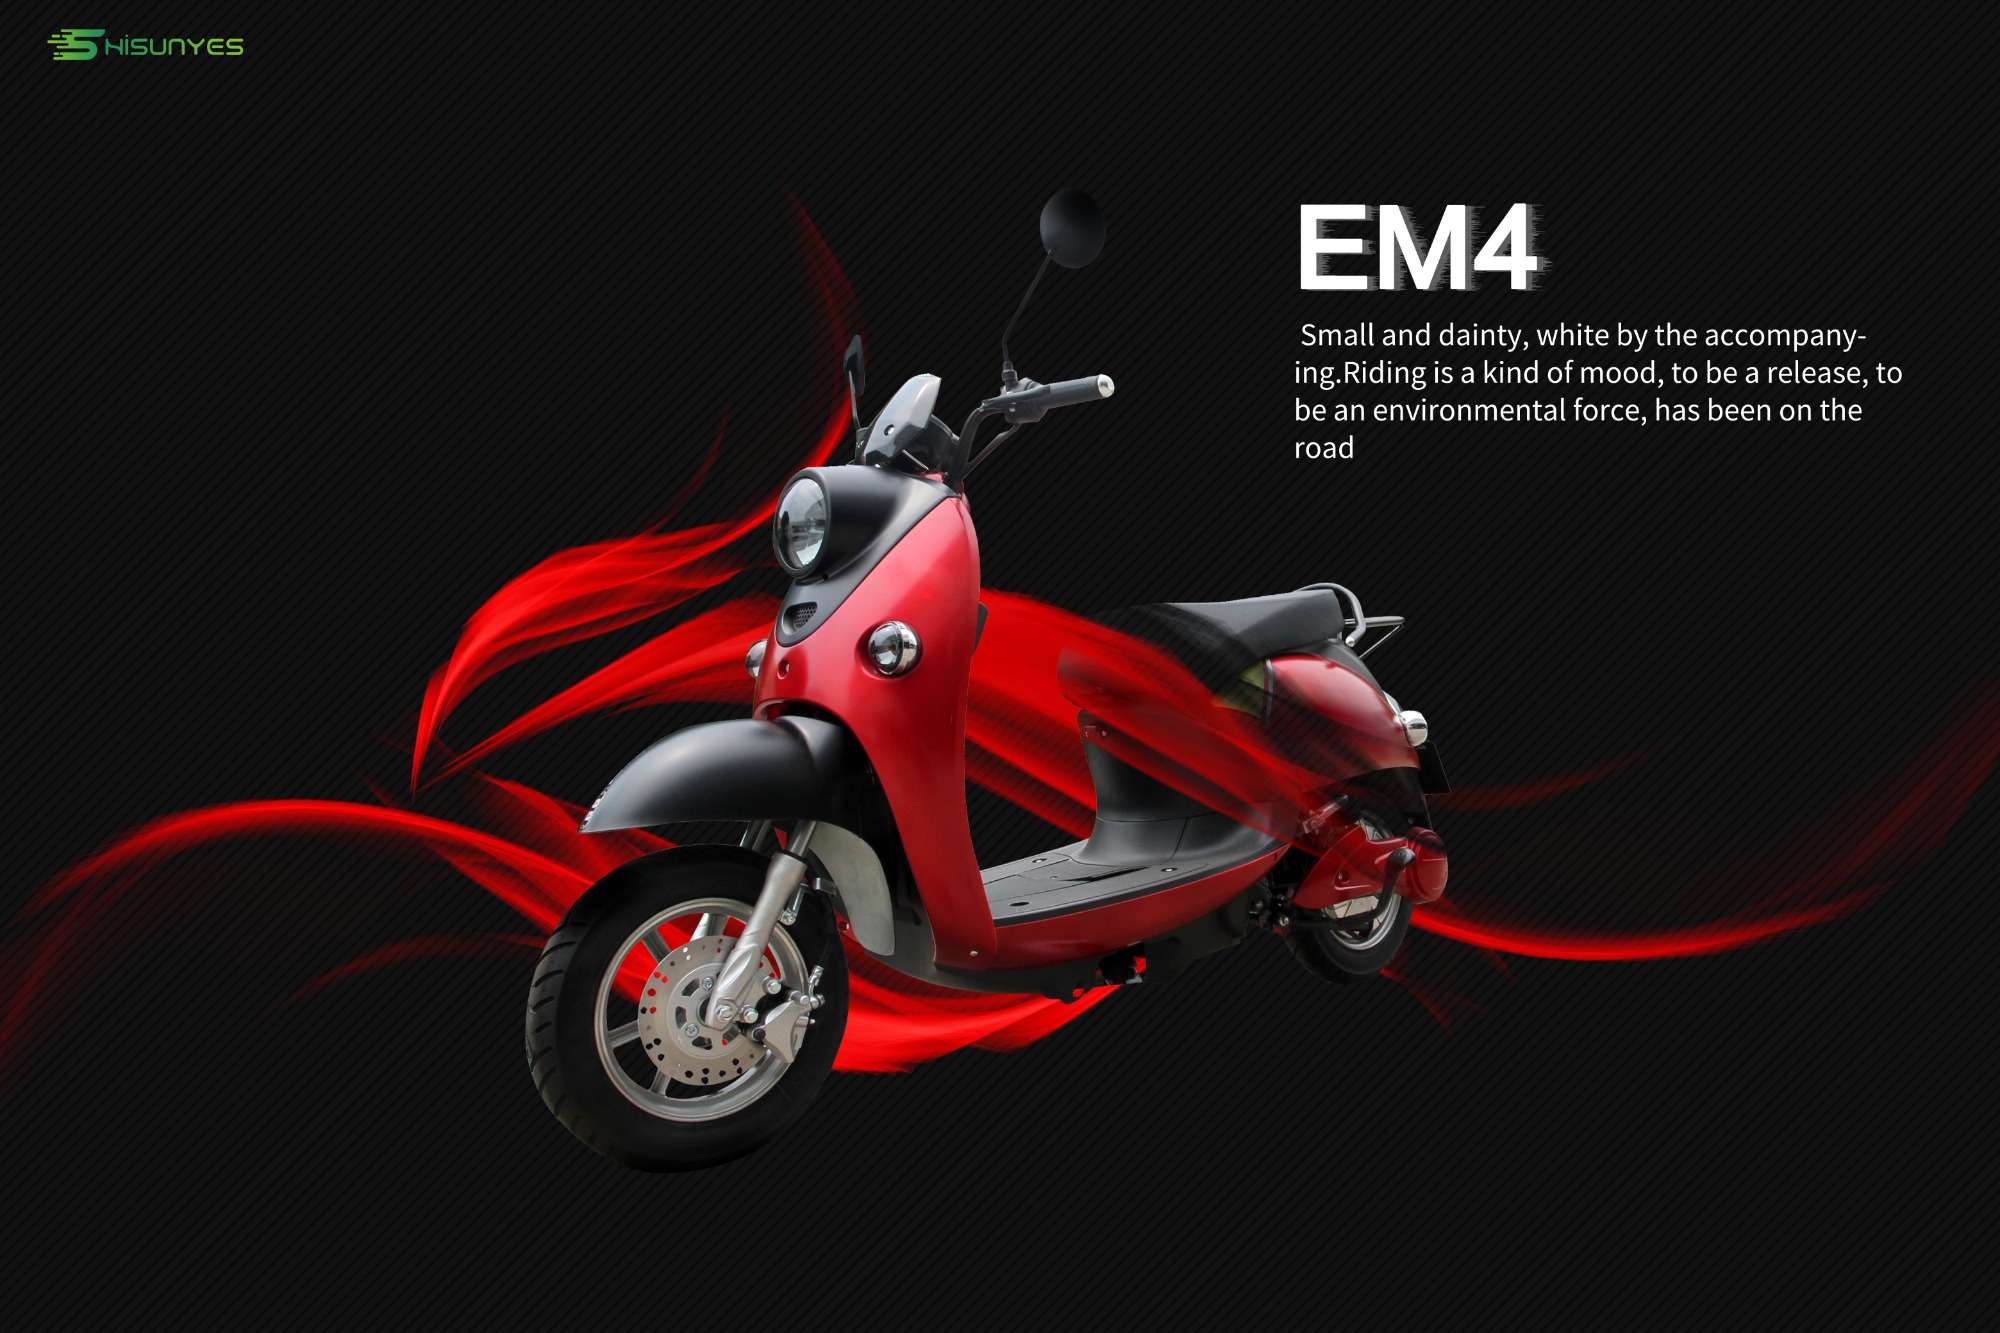 the electric scooter EM4 is the First choice for women's commuting.